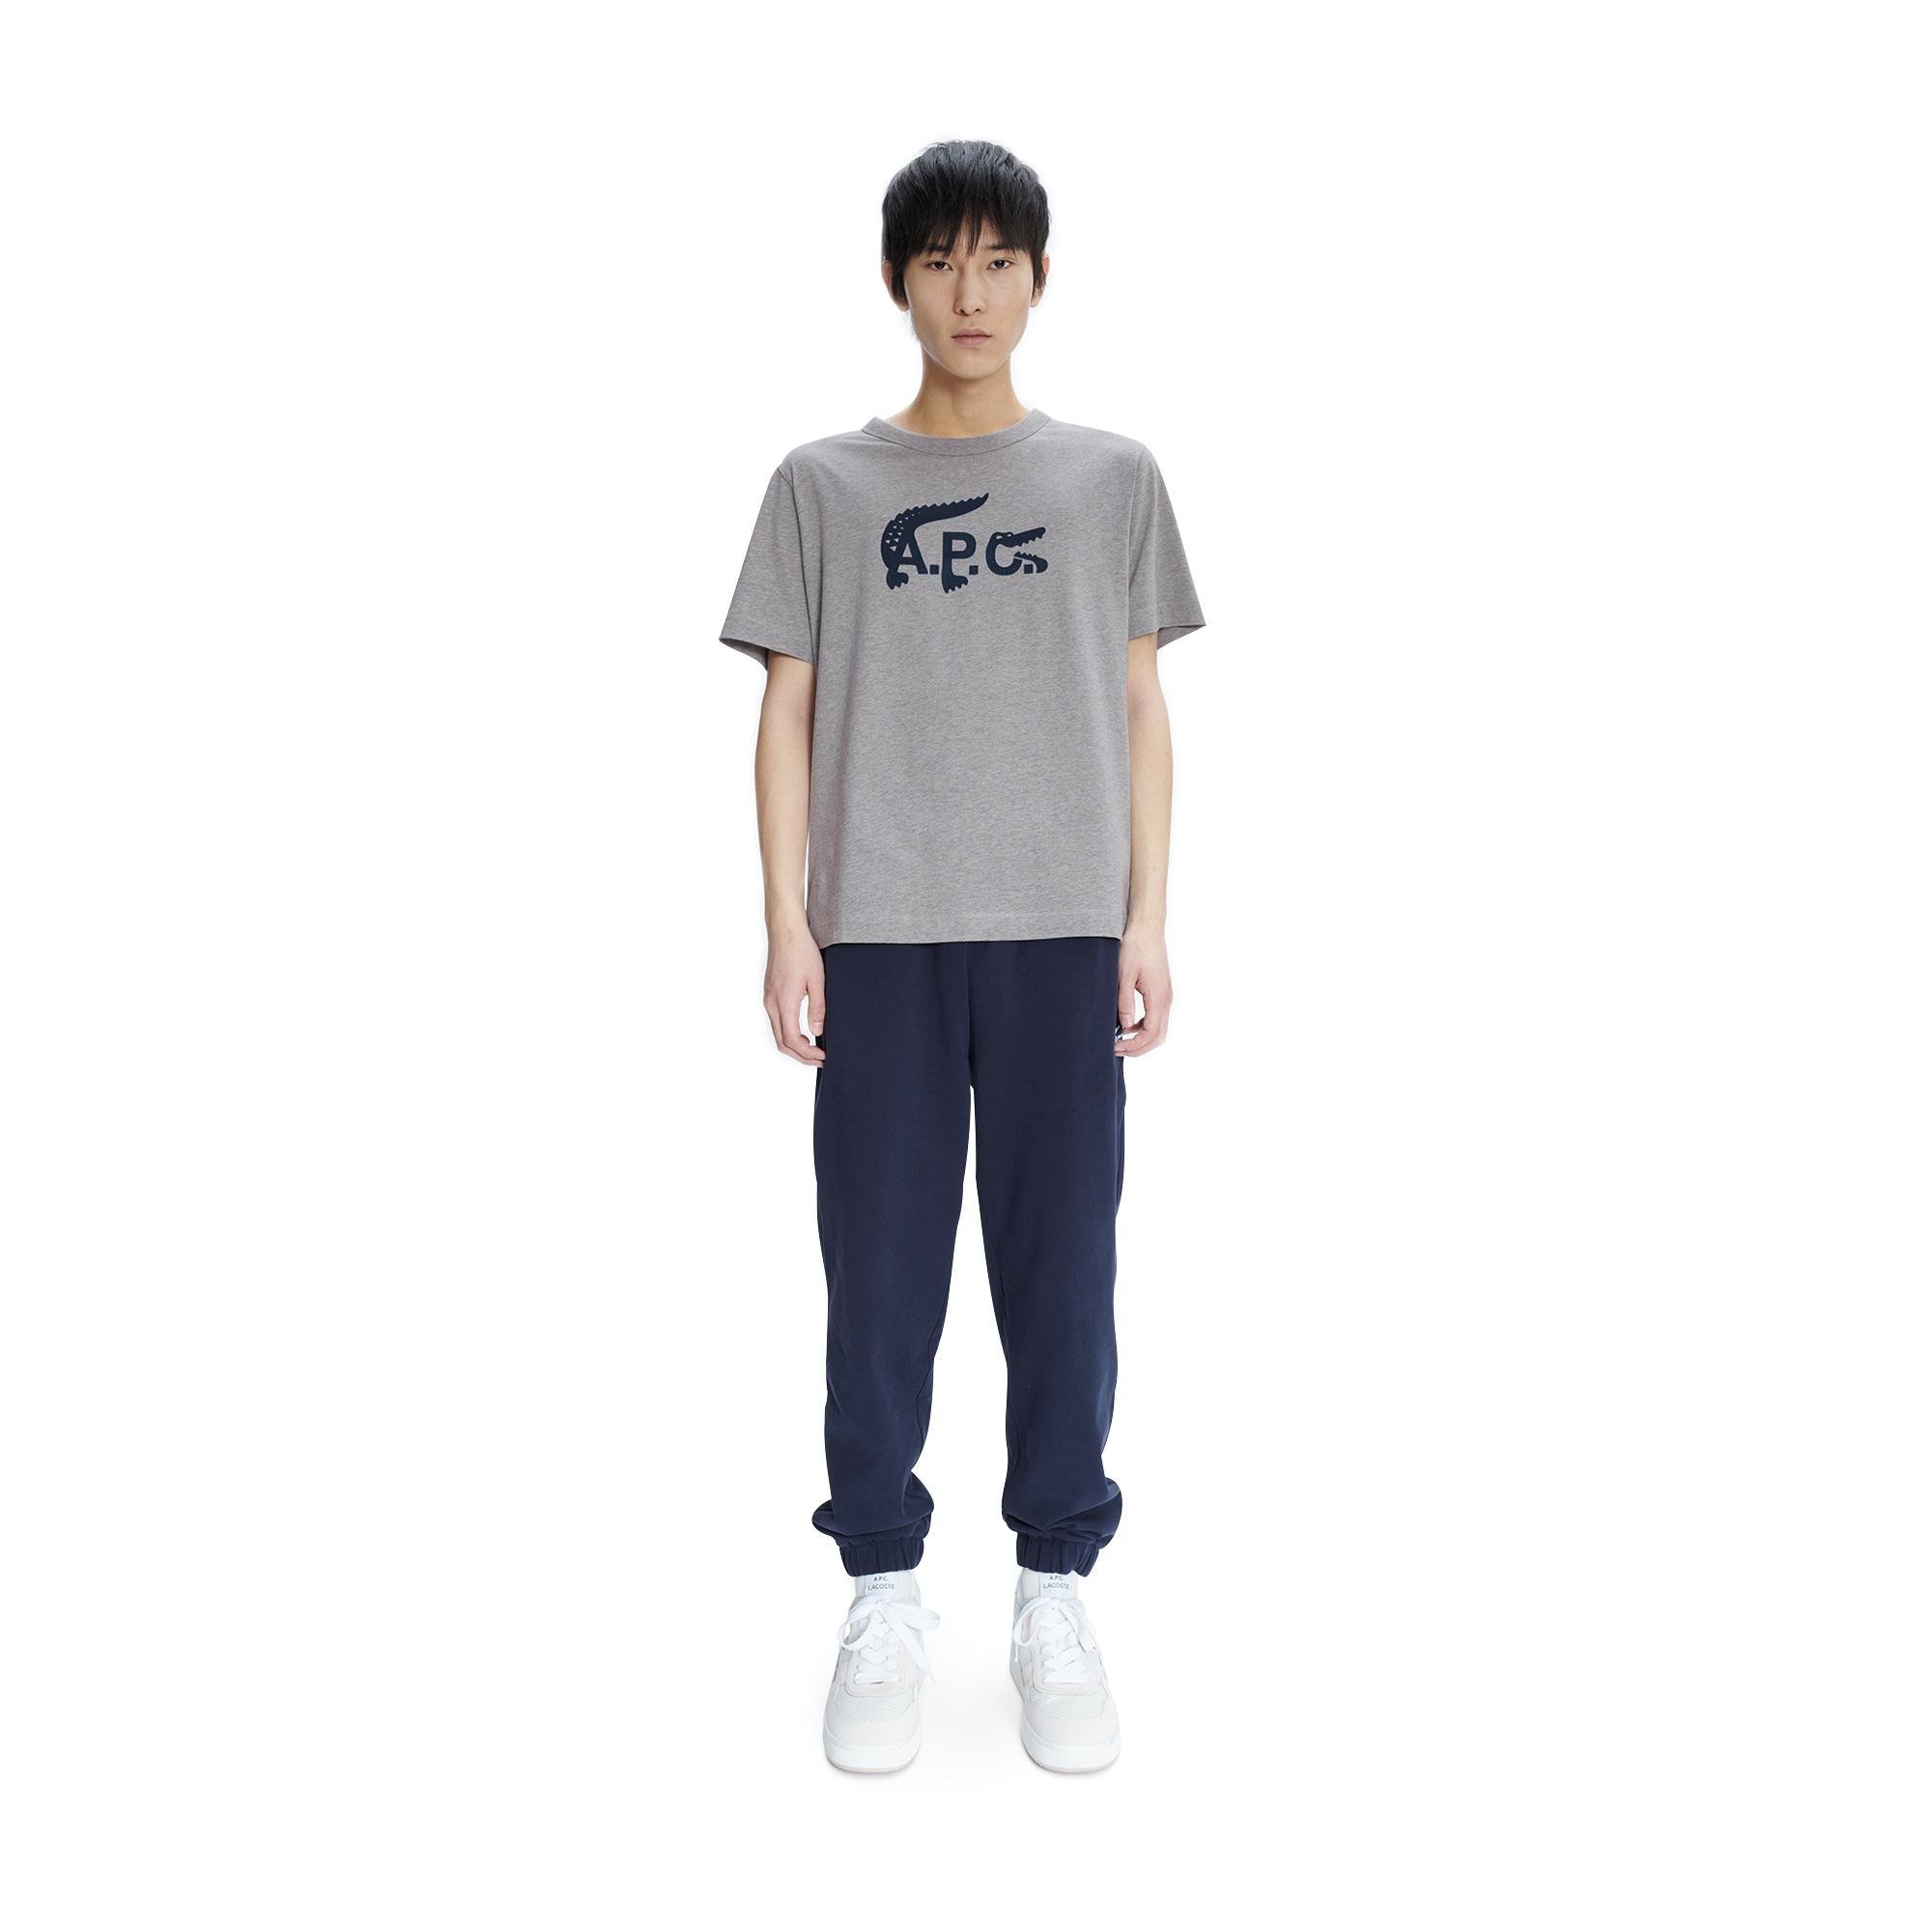 Lacoste X A.P.C Unisex Relaxed Fit Bisiklet Yaka Baskılı Gri T-Shirt